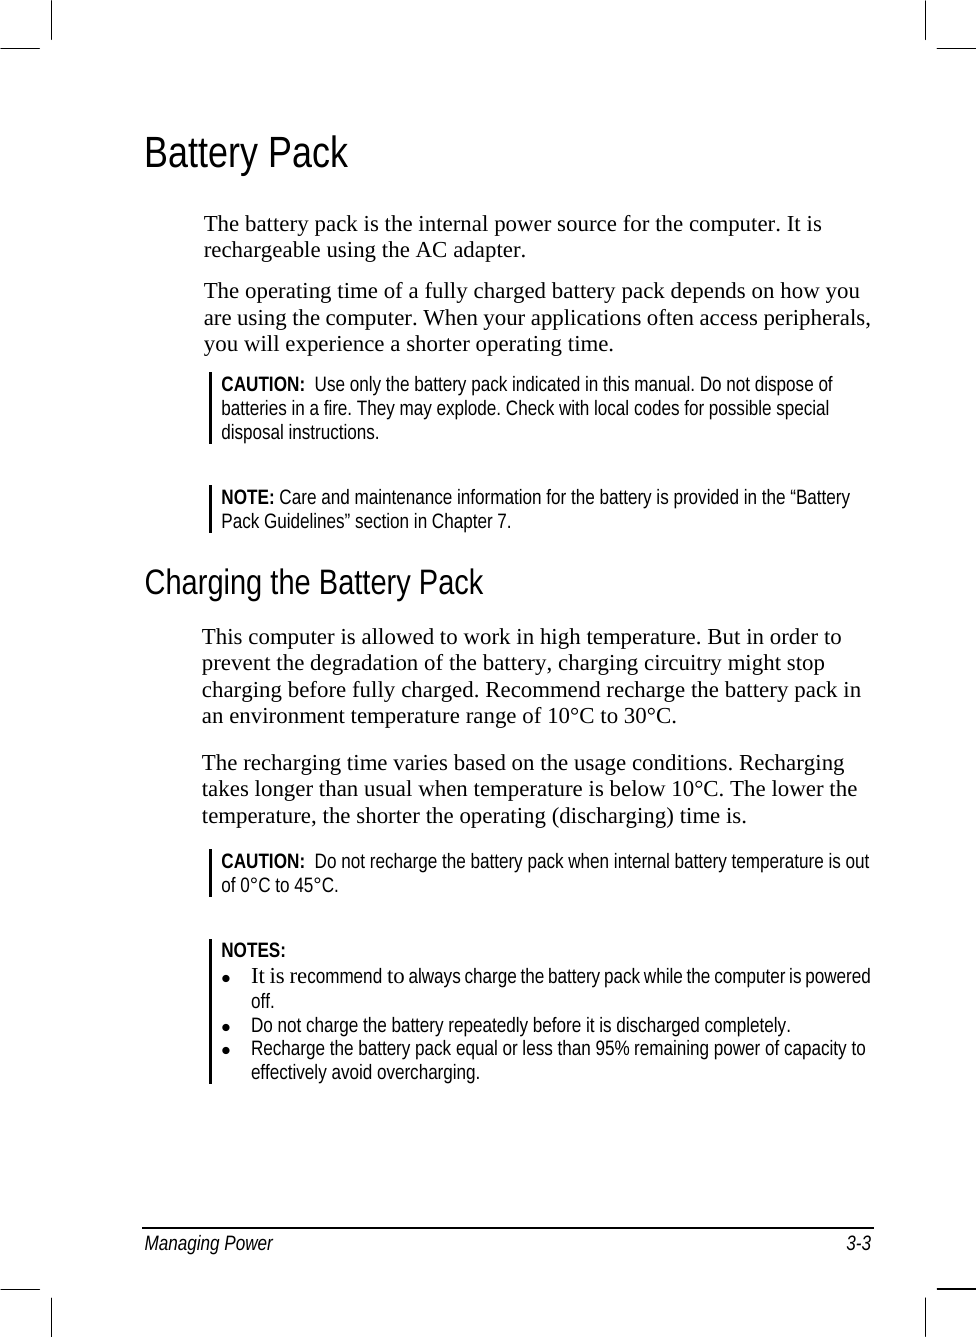  Managing Power  3-3 Battery Pack The battery pack is the internal power source for the computer. It is rechargeable using the AC adapter. The operating time of a fully charged battery pack depends on how you are using the computer. When your applications often access peripherals, you will experience a shorter operating time. CAUTION:  Use only the battery pack indicated in this manual. Do not dispose of batteries in a fire. They may explode. Check with local codes for possible special disposal instructions.  NOTE: Care and maintenance information for the battery is provided in the “Battery Pack Guidelines” section in Chapter 7. Charging the Battery Pack This computer is allowed to work in high temperature. But in order to prevent the degradation of the battery, charging circuitry might stop charging before fully charged. Recommend recharge the battery pack in an environment temperature range of 10°C to 30°C. The recharging time varies based on the usage conditions. Recharging takes longer than usual when temperature is below 10°C. The lower the temperature, the shorter the operating (discharging) time is. CAUTION:  Do not recharge the battery pack when internal battery temperature is out of 0°C to 45°C.   NOTES:   It is recommend to always charge the battery pack while the computer is powered off.    Do not charge the battery repeatedly before it is discharged completely.    Recharge the battery pack equal or less than 95% remaining power of capacity to effectively avoid overcharging.  